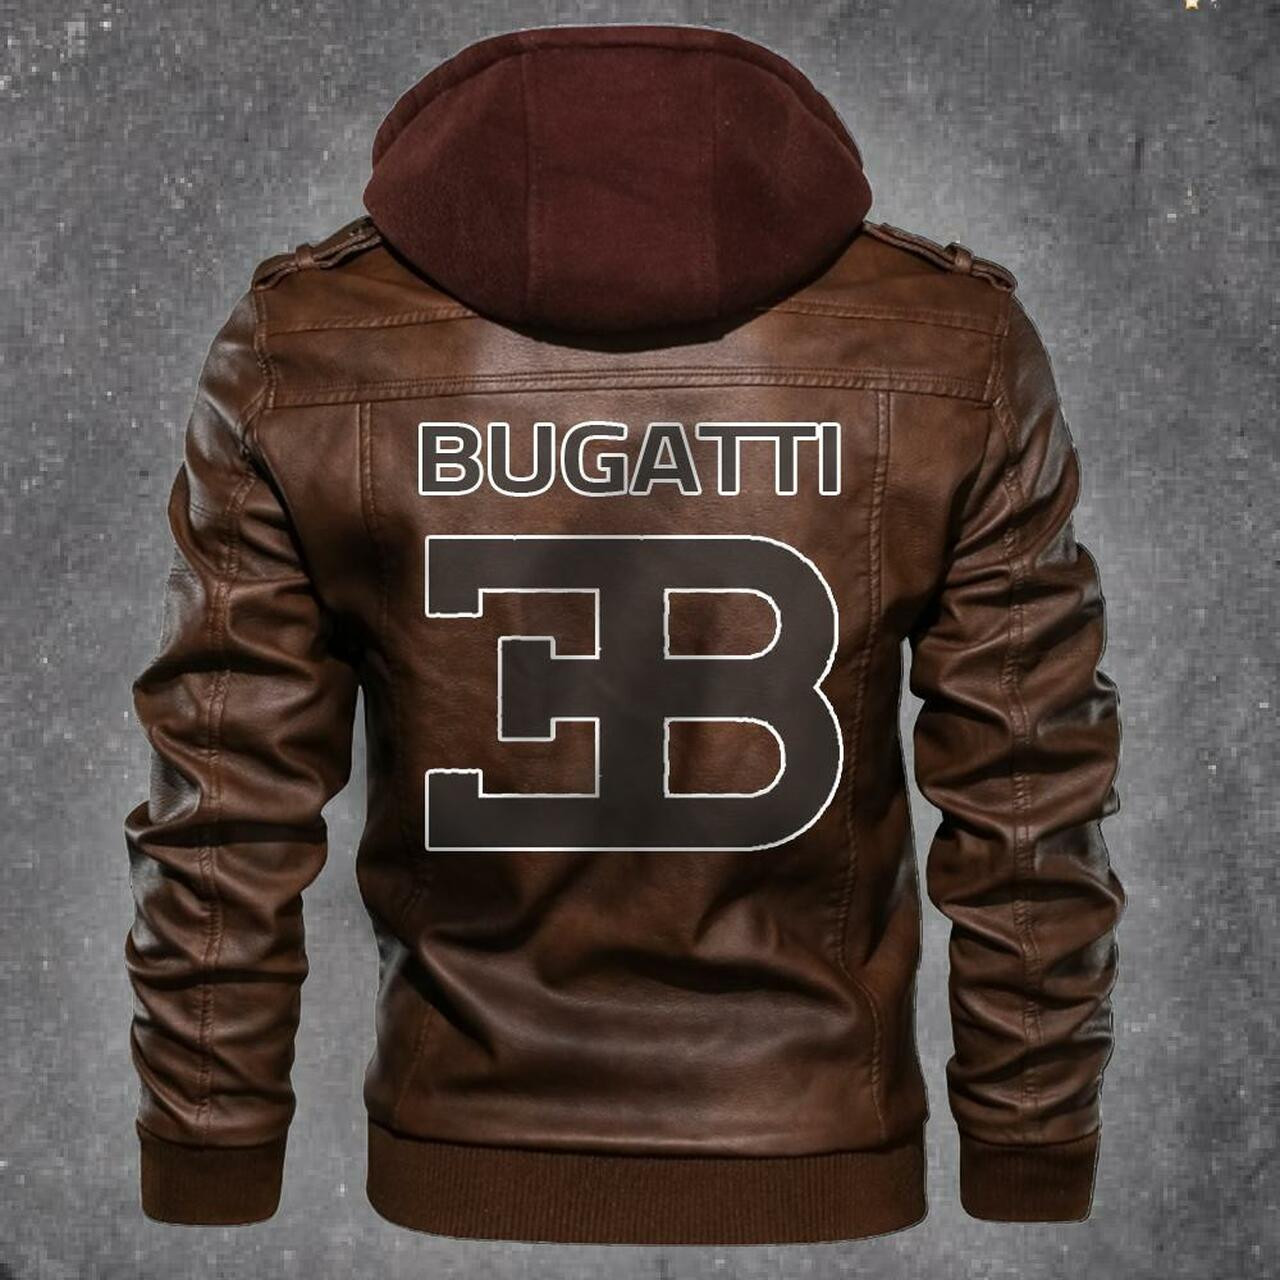 Check out and find the right leather jacket below 250